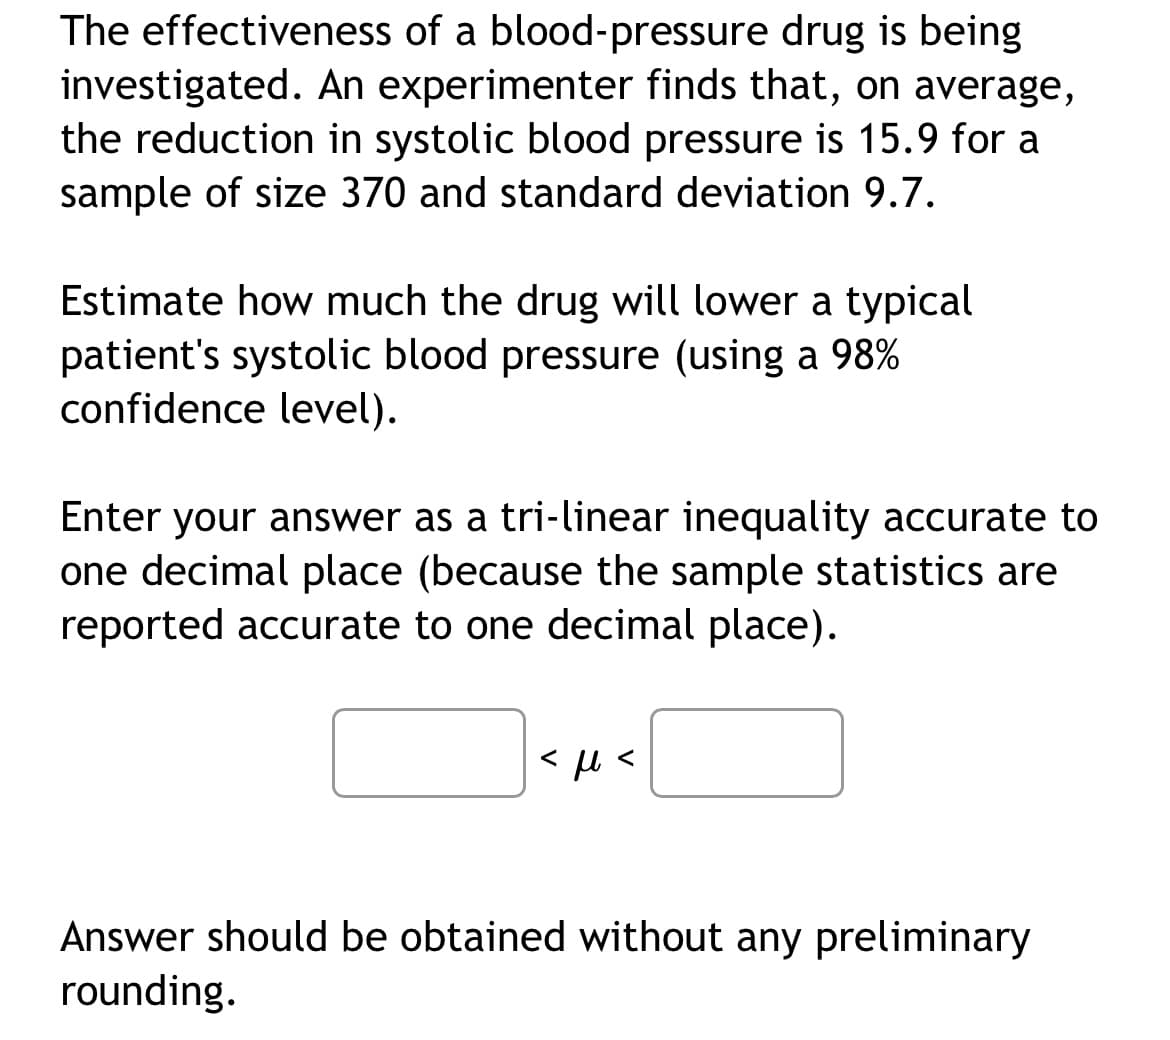 The effectiveness of a blood-pressure drug is being
investigated. An experimenter finds that, on average,
the reduction in systolic blood pressure is 15.9 for a
sample of size 370 and standard deviation 9.7.
Estimate how much the drug will lower a typical
patient's systolic blood pressure (using a 98%
confidence level).
Enter your answer as a tri-linear inequality accurate to
one decimal place (because the sample statistics are
reported accurate to one decimal place).
<μl
Answer should be obtained without any preliminary
rounding.